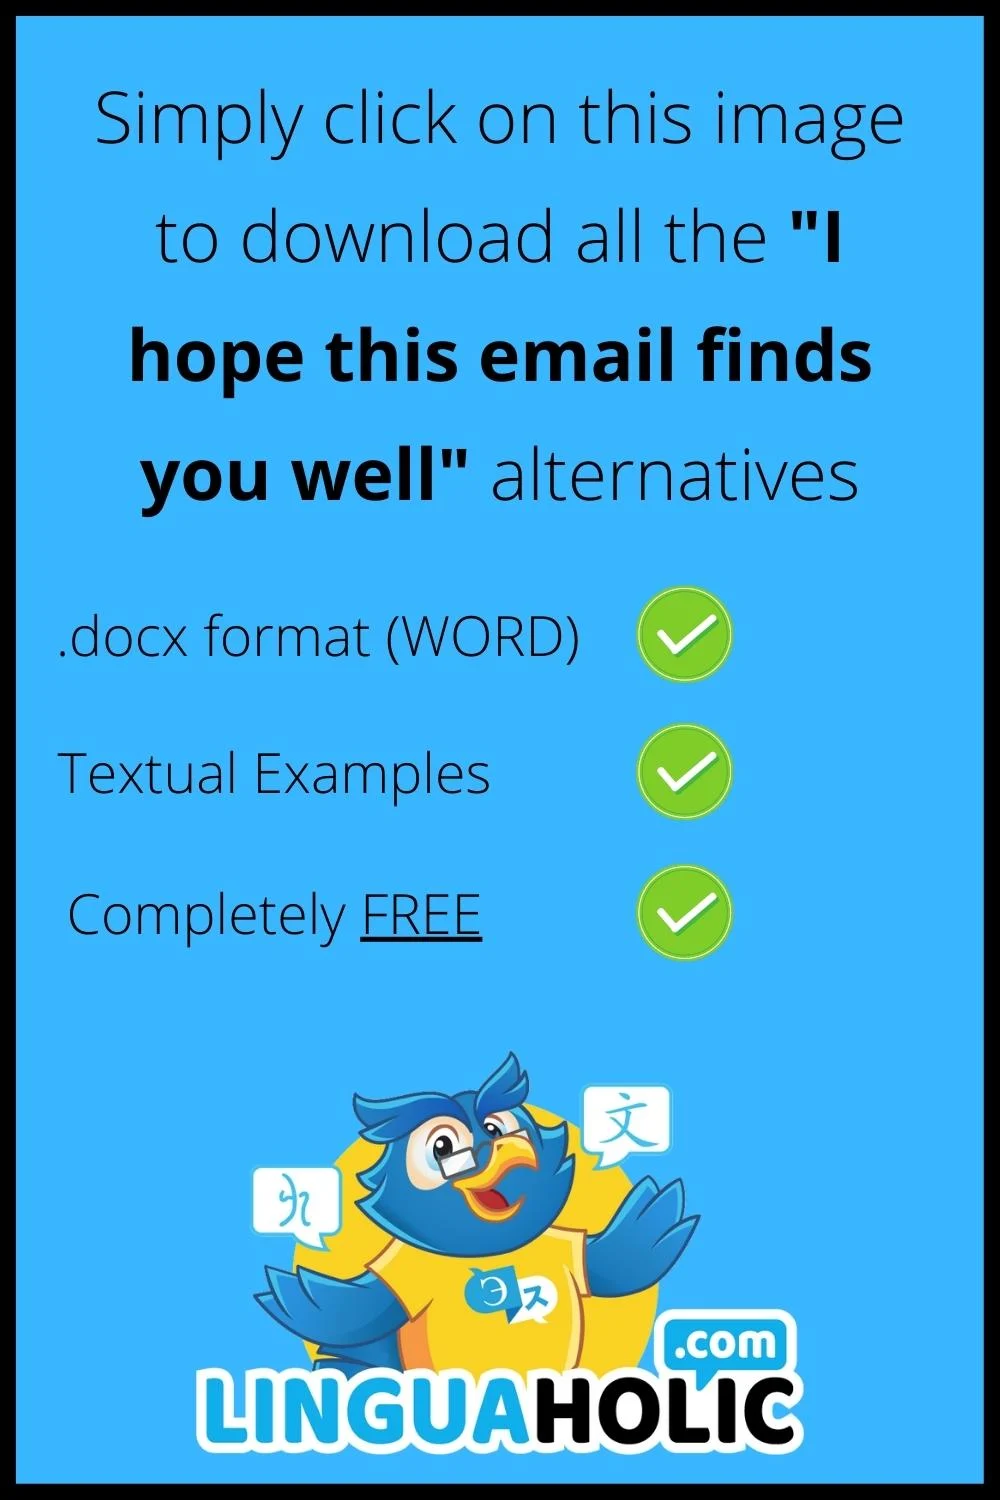 I hope this email finds you well alternatives